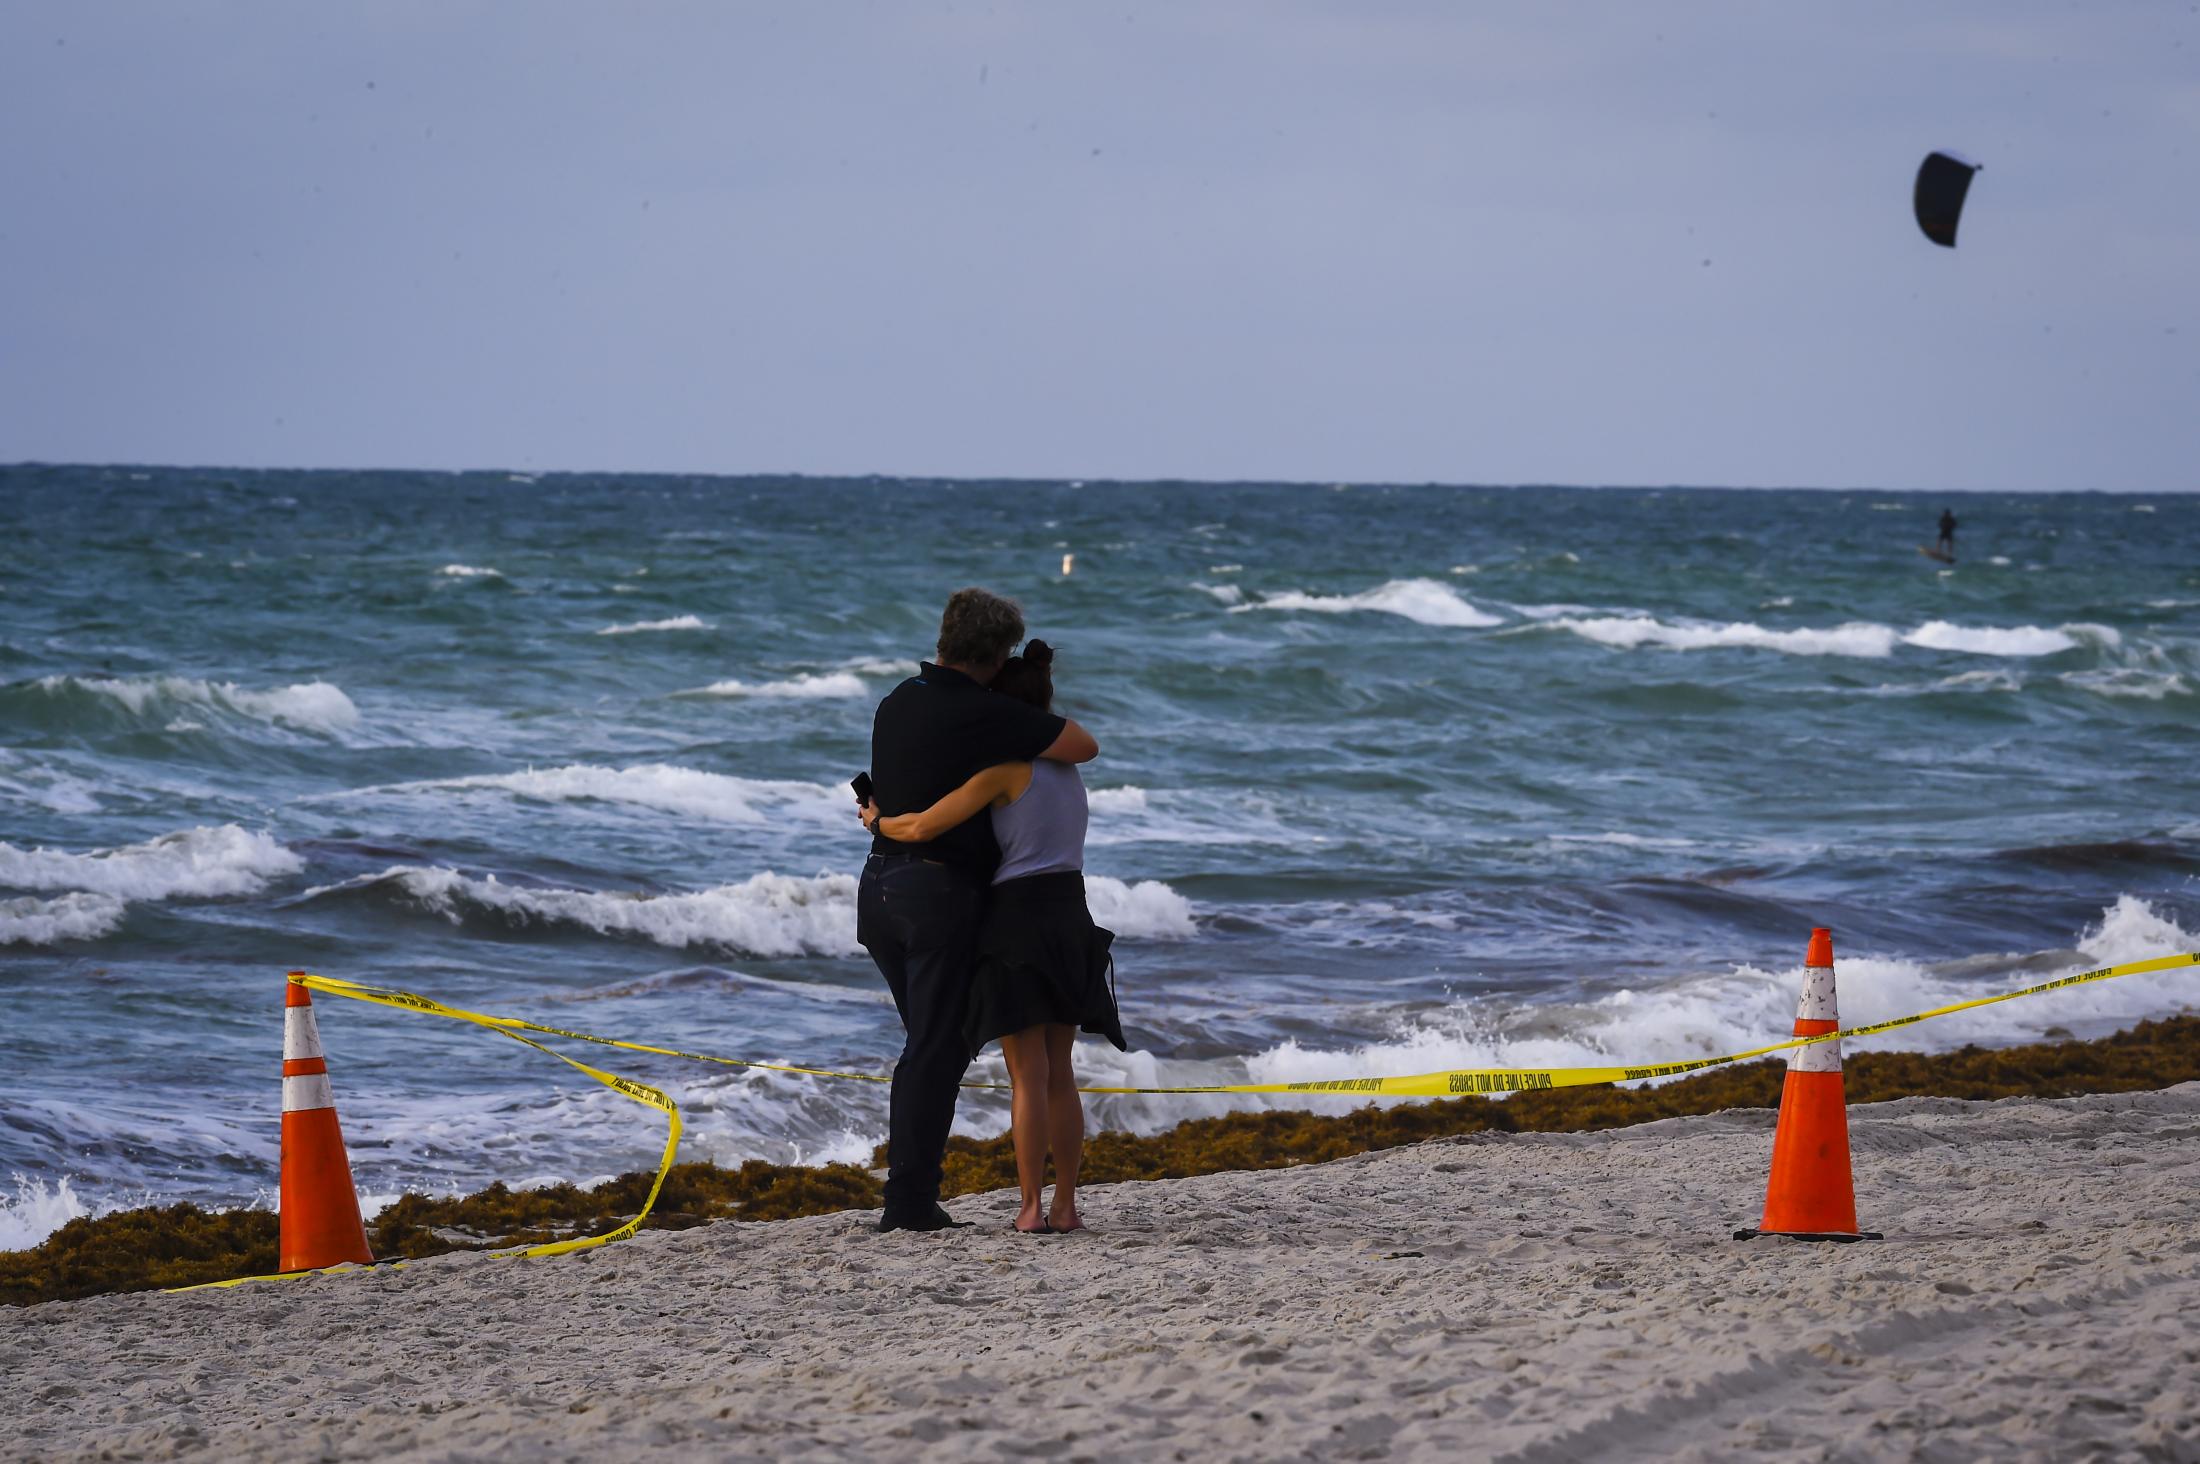 2021 - Surfside building collapsed - A couple hugs next to a partially collapsed building in...